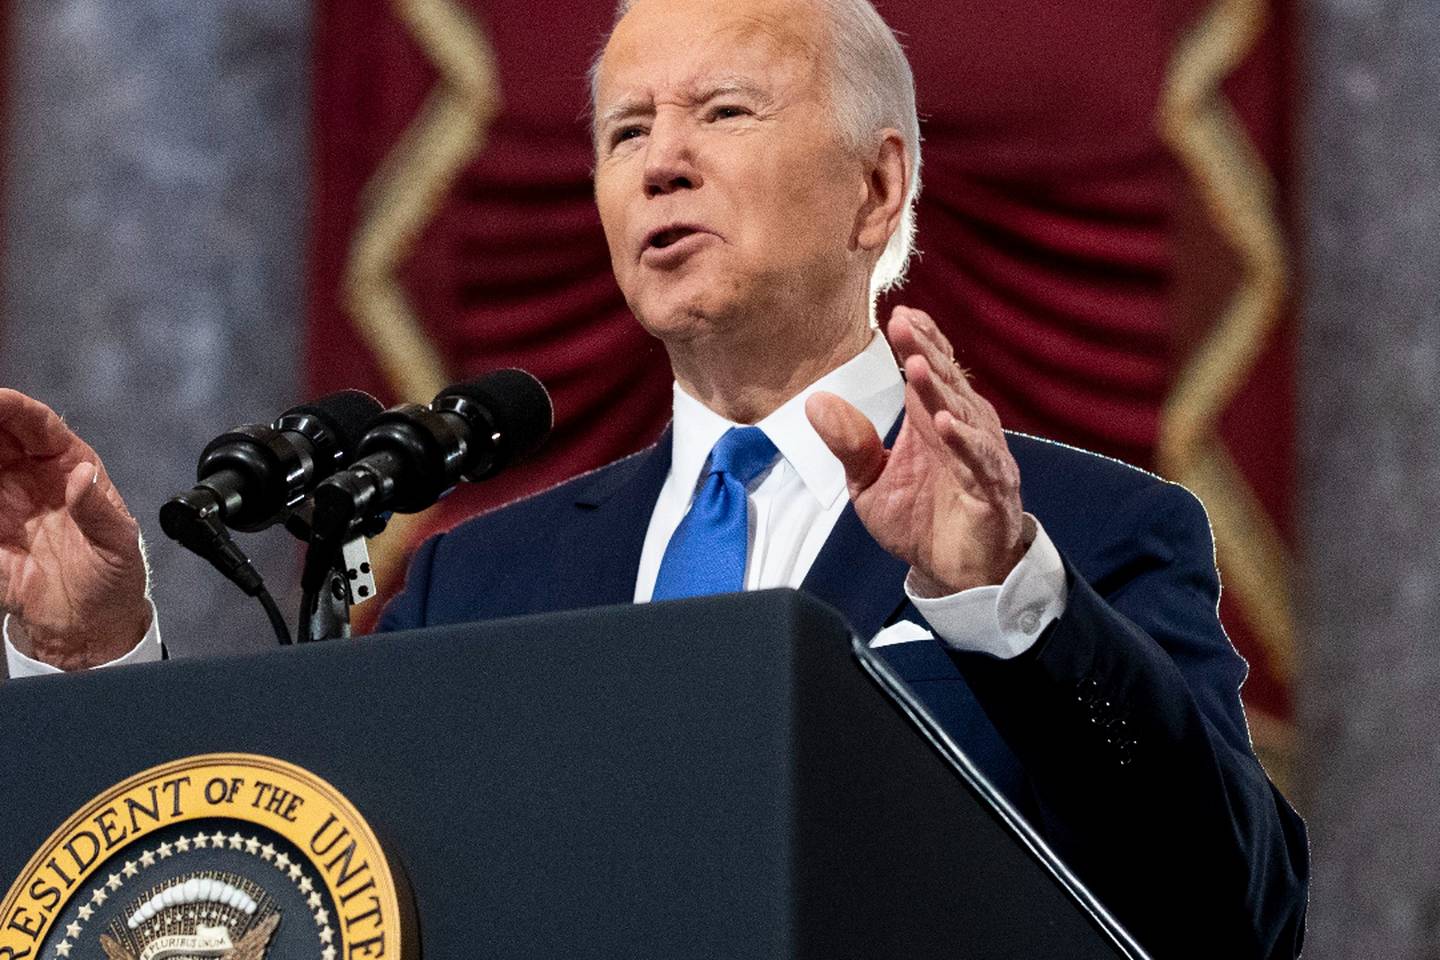 Biden on Capitol riot: Trump's 'bruised ego matters more to him than our democracy'